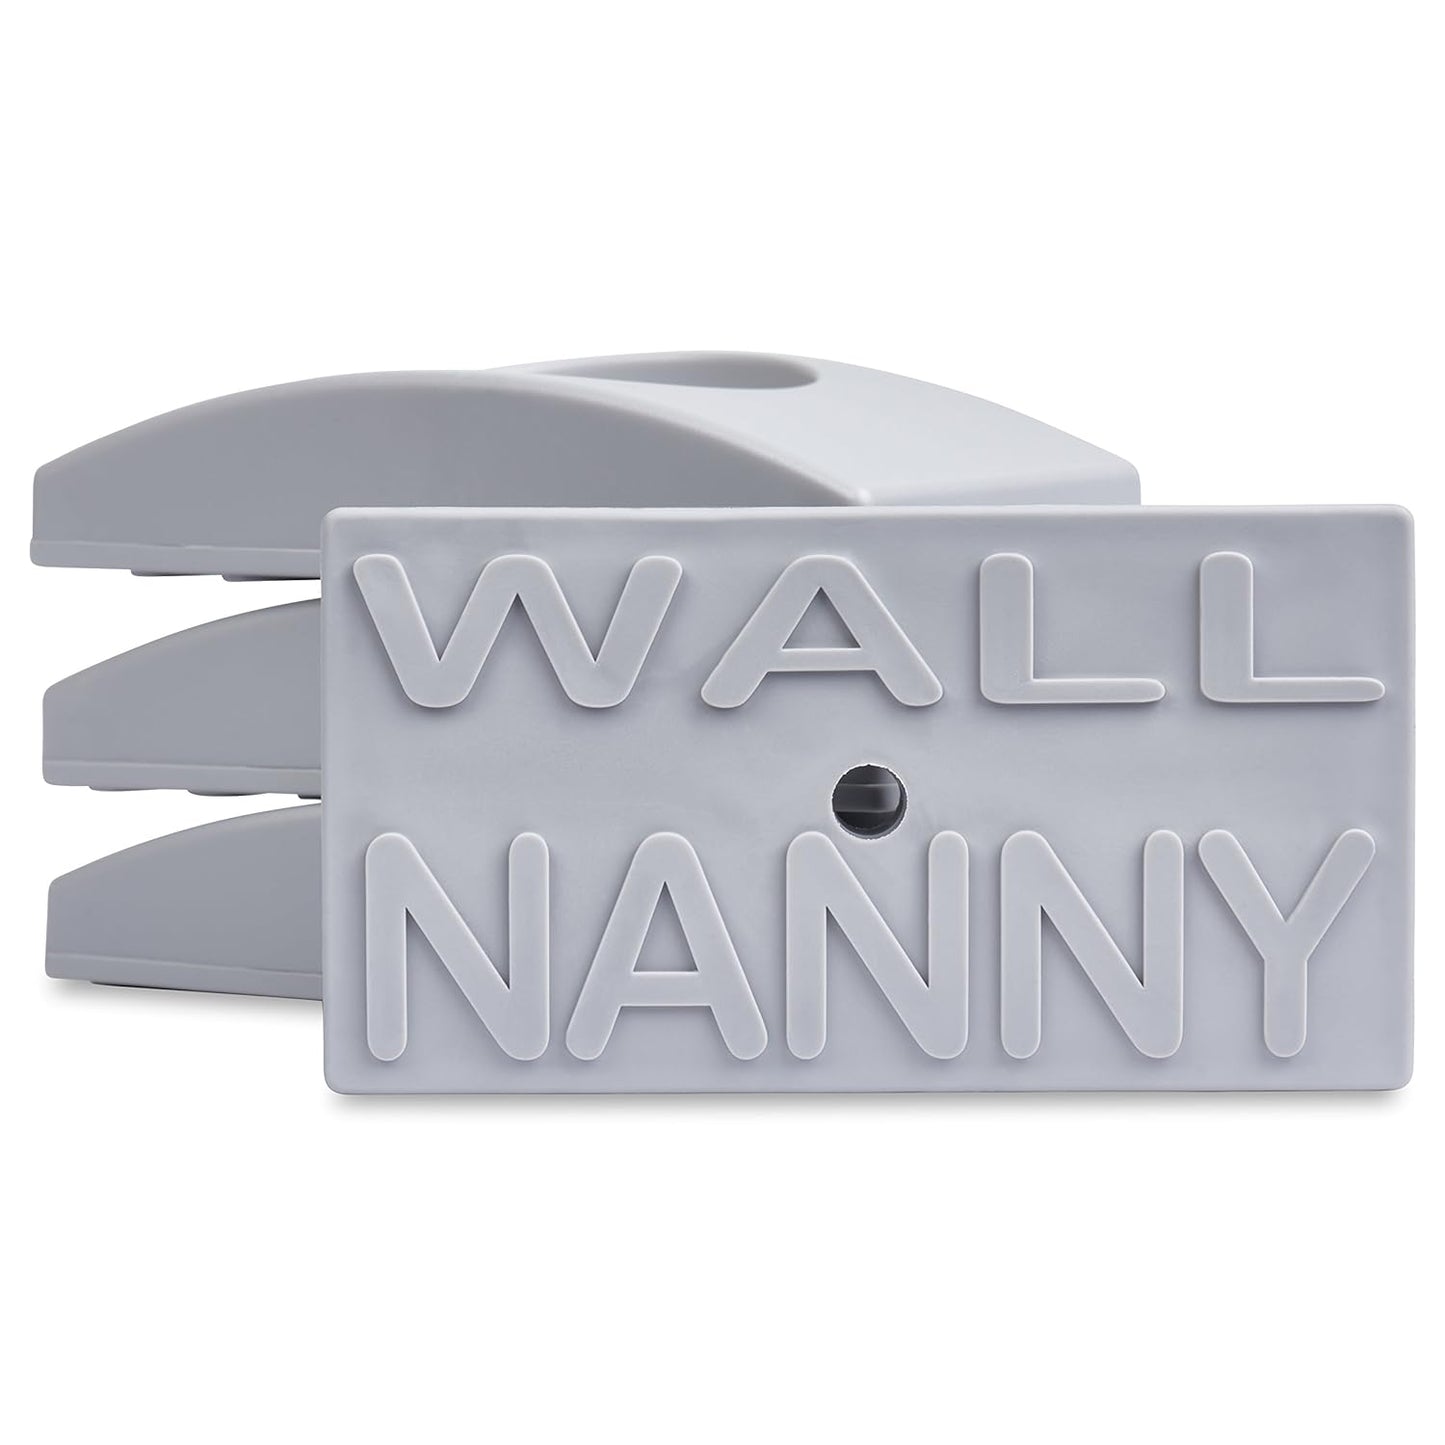 Wall Nanny - Baby Gate Wall Protector (Made in USA) Protect Walls from Pet Gates & Dog Gates - No Safety Hazard on Spindles - for Child Pressure Mounted Baby Gate for Stairs Cup Guard - White, 4 Pack